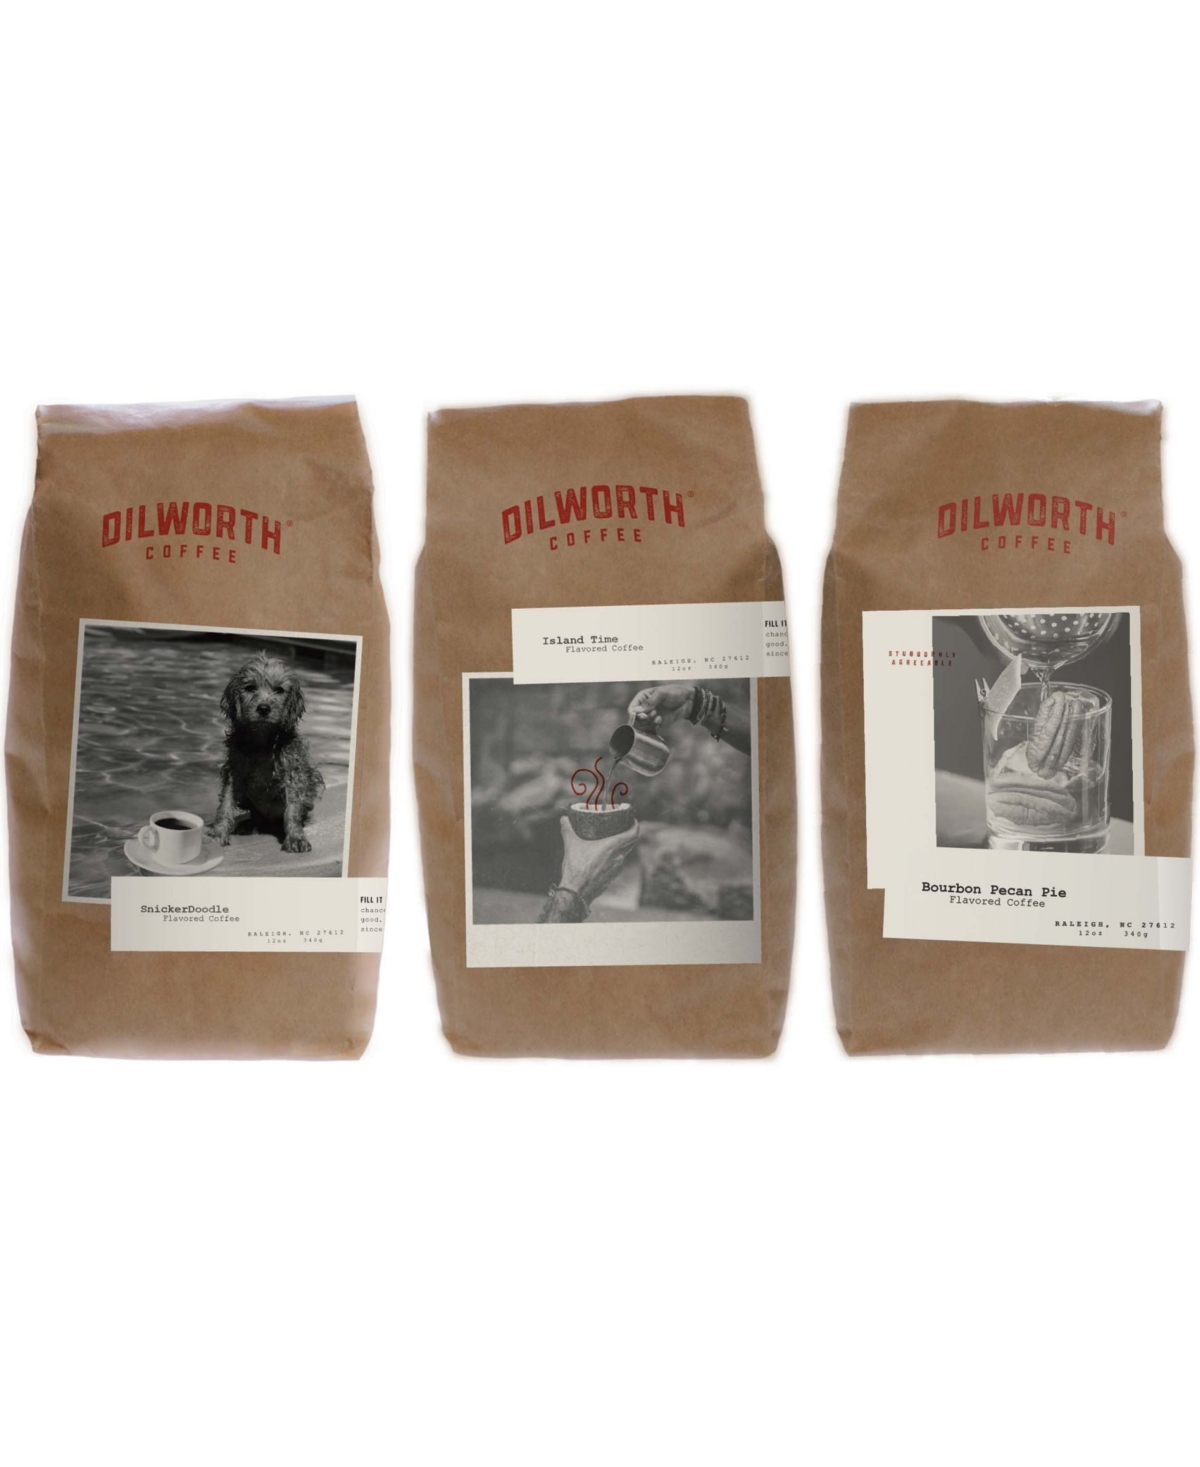 Dilworth Coffee Ground Coffee, Premium Flavored Variety Coffee Bundle, 36 Ounces Pack